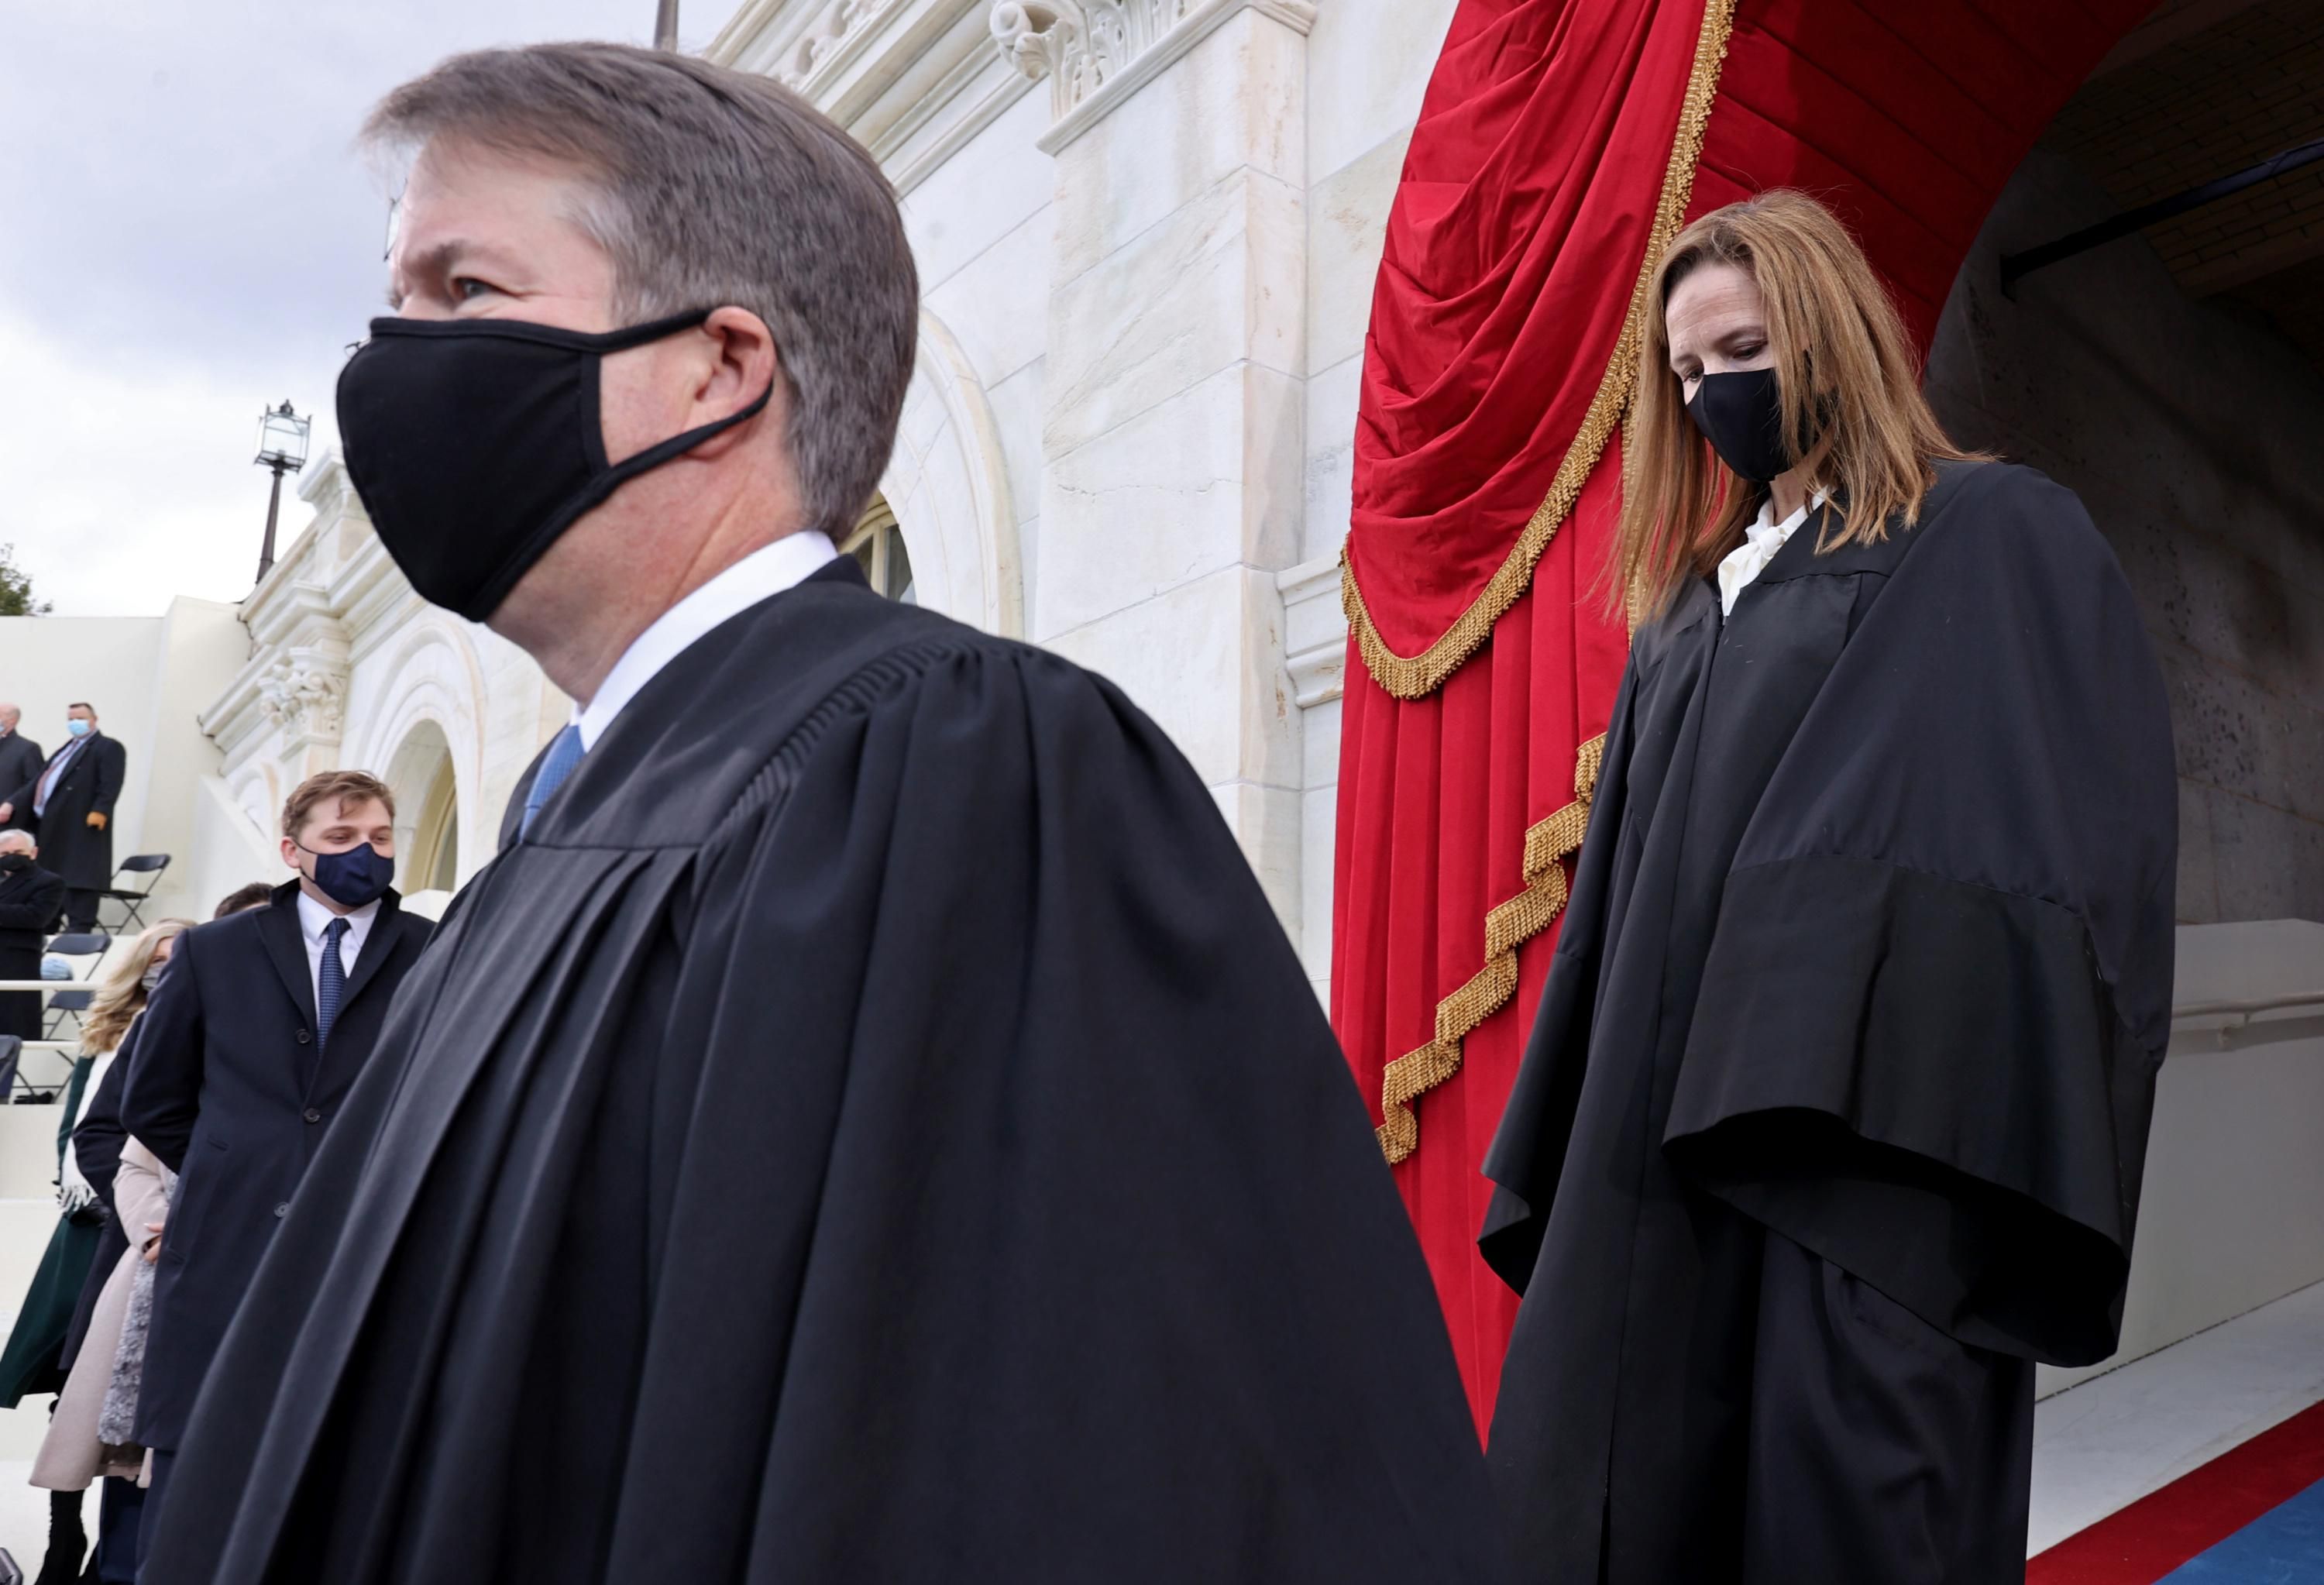 U.S. Supreme Court Justices Brett Kavanaugh and Amy Coney Barrett arrive for the inauguration of Joe Biden as the 46th president of the United States at the U.S. Capitol in Washington D.C. on January 20, 2021. (Photo: Jonathan Ernst/Pool/AFP via Getty Images)